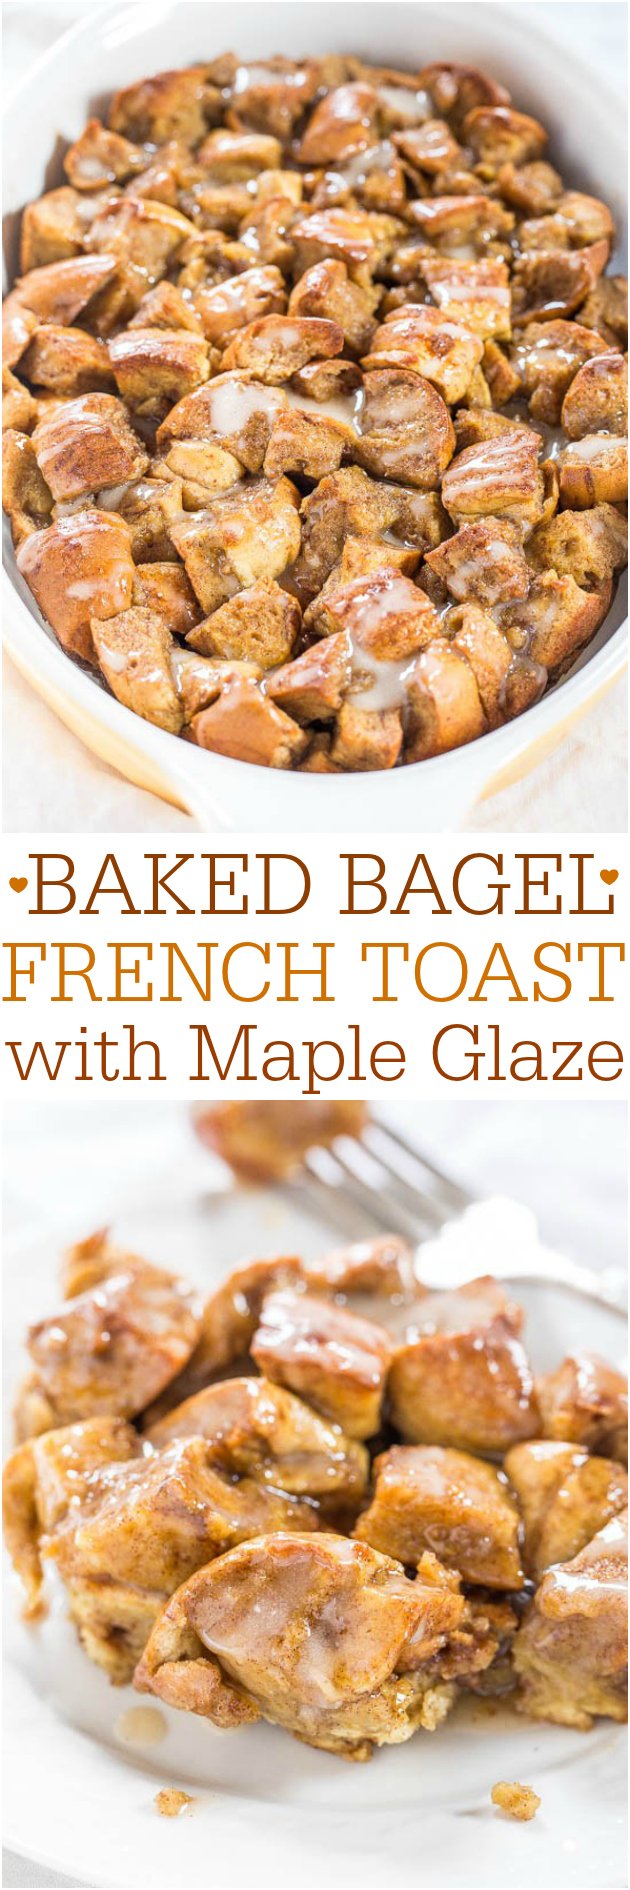 Baked Bagel French Toast with Maple Glaze - Soft, chewy bagels make the best French toast! So easy, no flipping required, and tastes phenomenally good!!